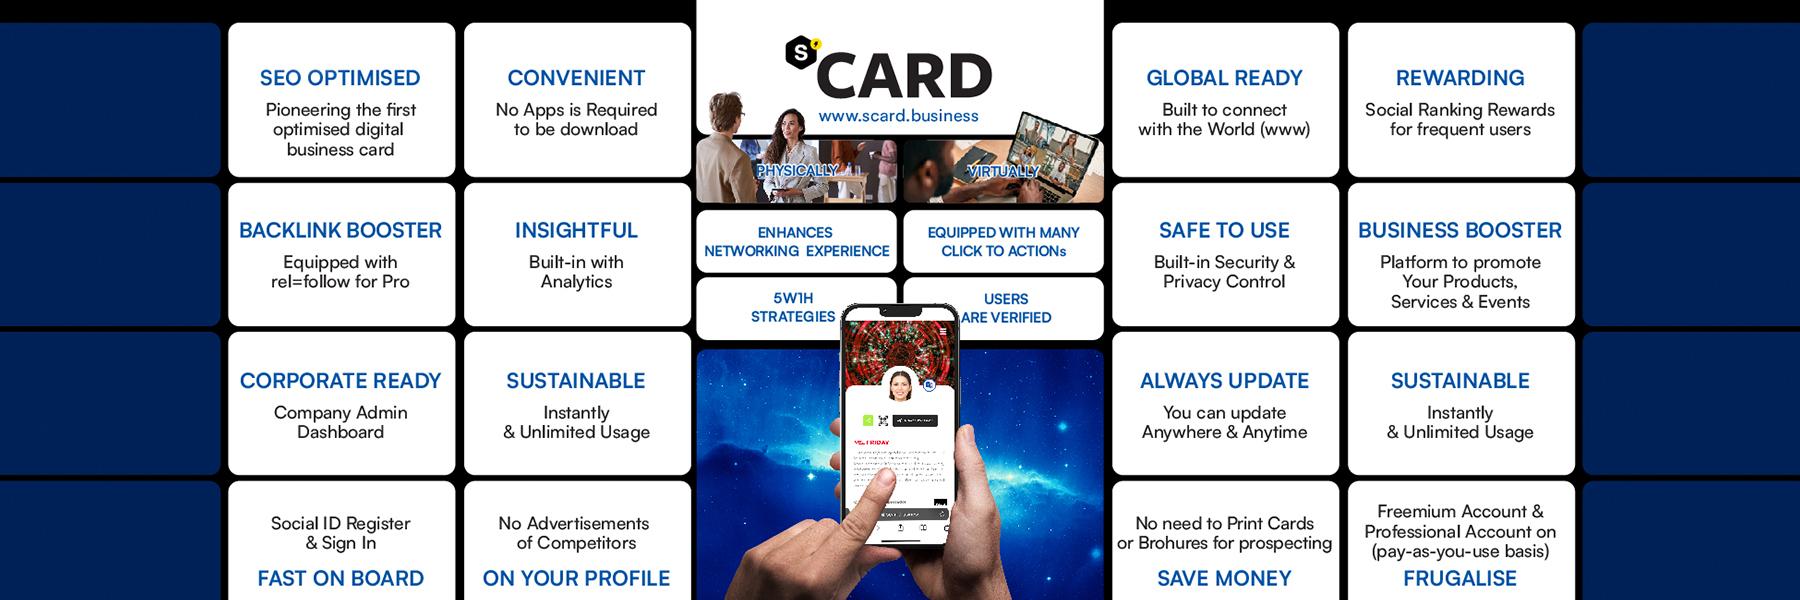 Frequent ask questions about s͛Card during the business networking event I have attended